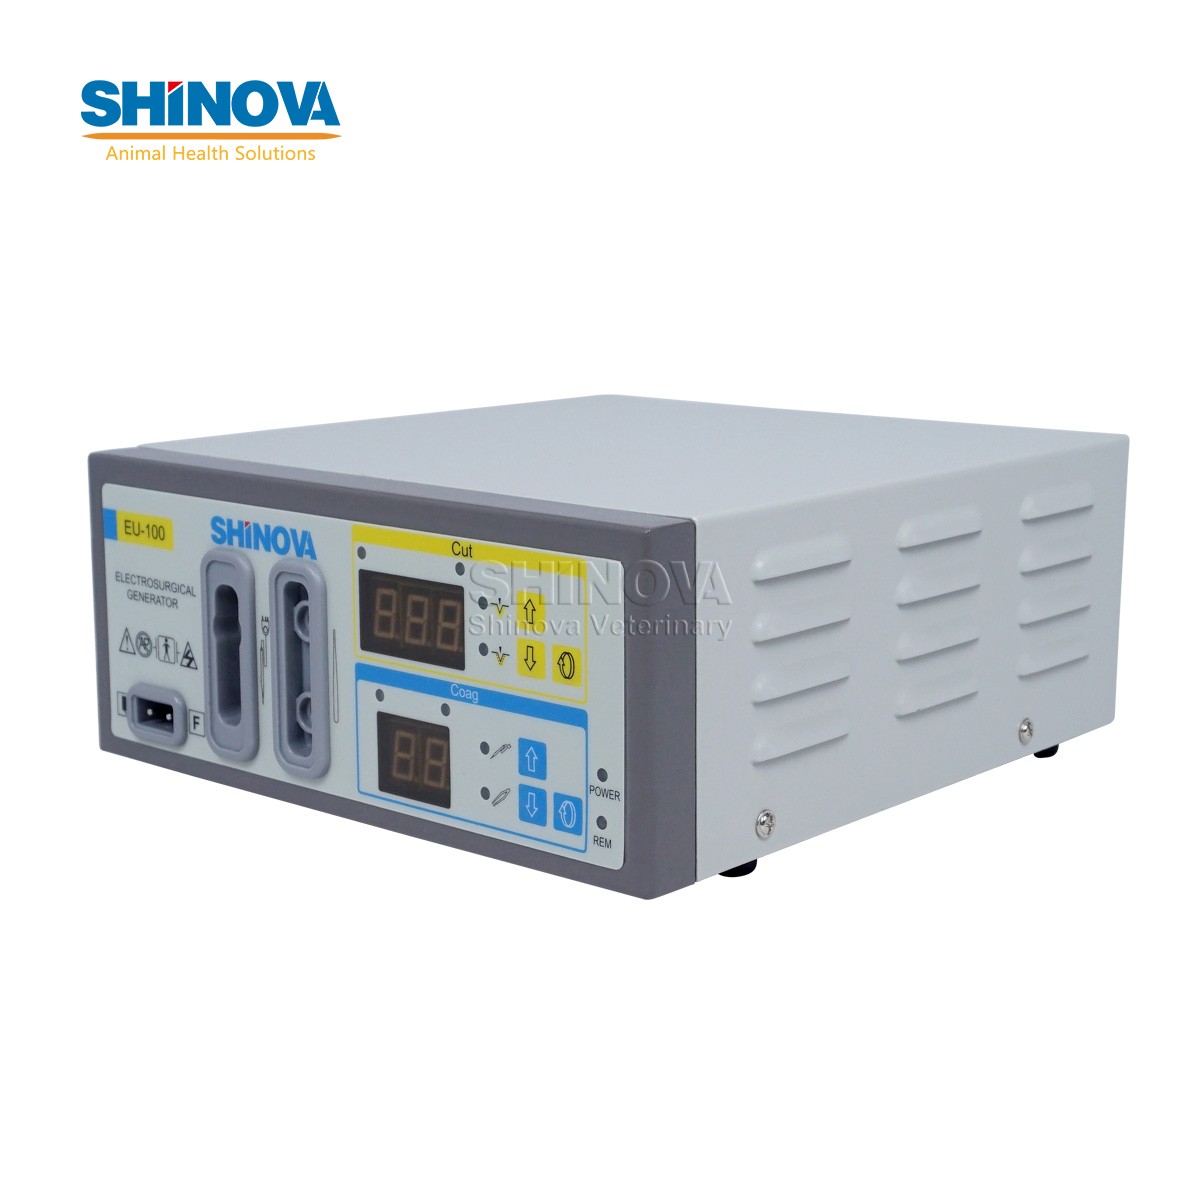 100W Veterinary Electrosurgical Unit